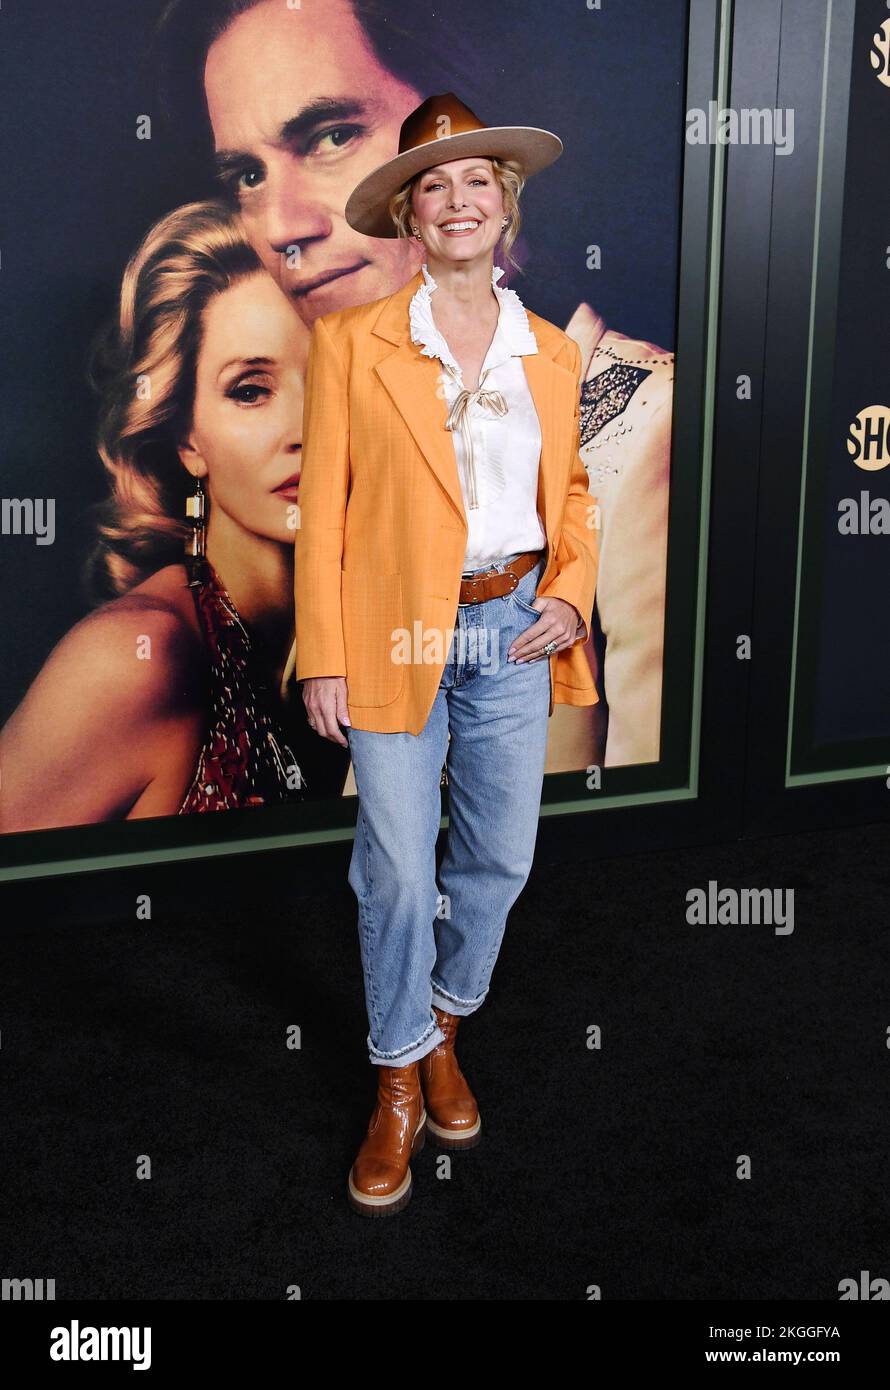 LOS ANGELES, CALIFORNIA - NOVEMBER 21: Melora Hardin attends Showtime's 'George & Tammy' premiere event at Goya Studios on November 21, 2022 in Los An Stock Photo